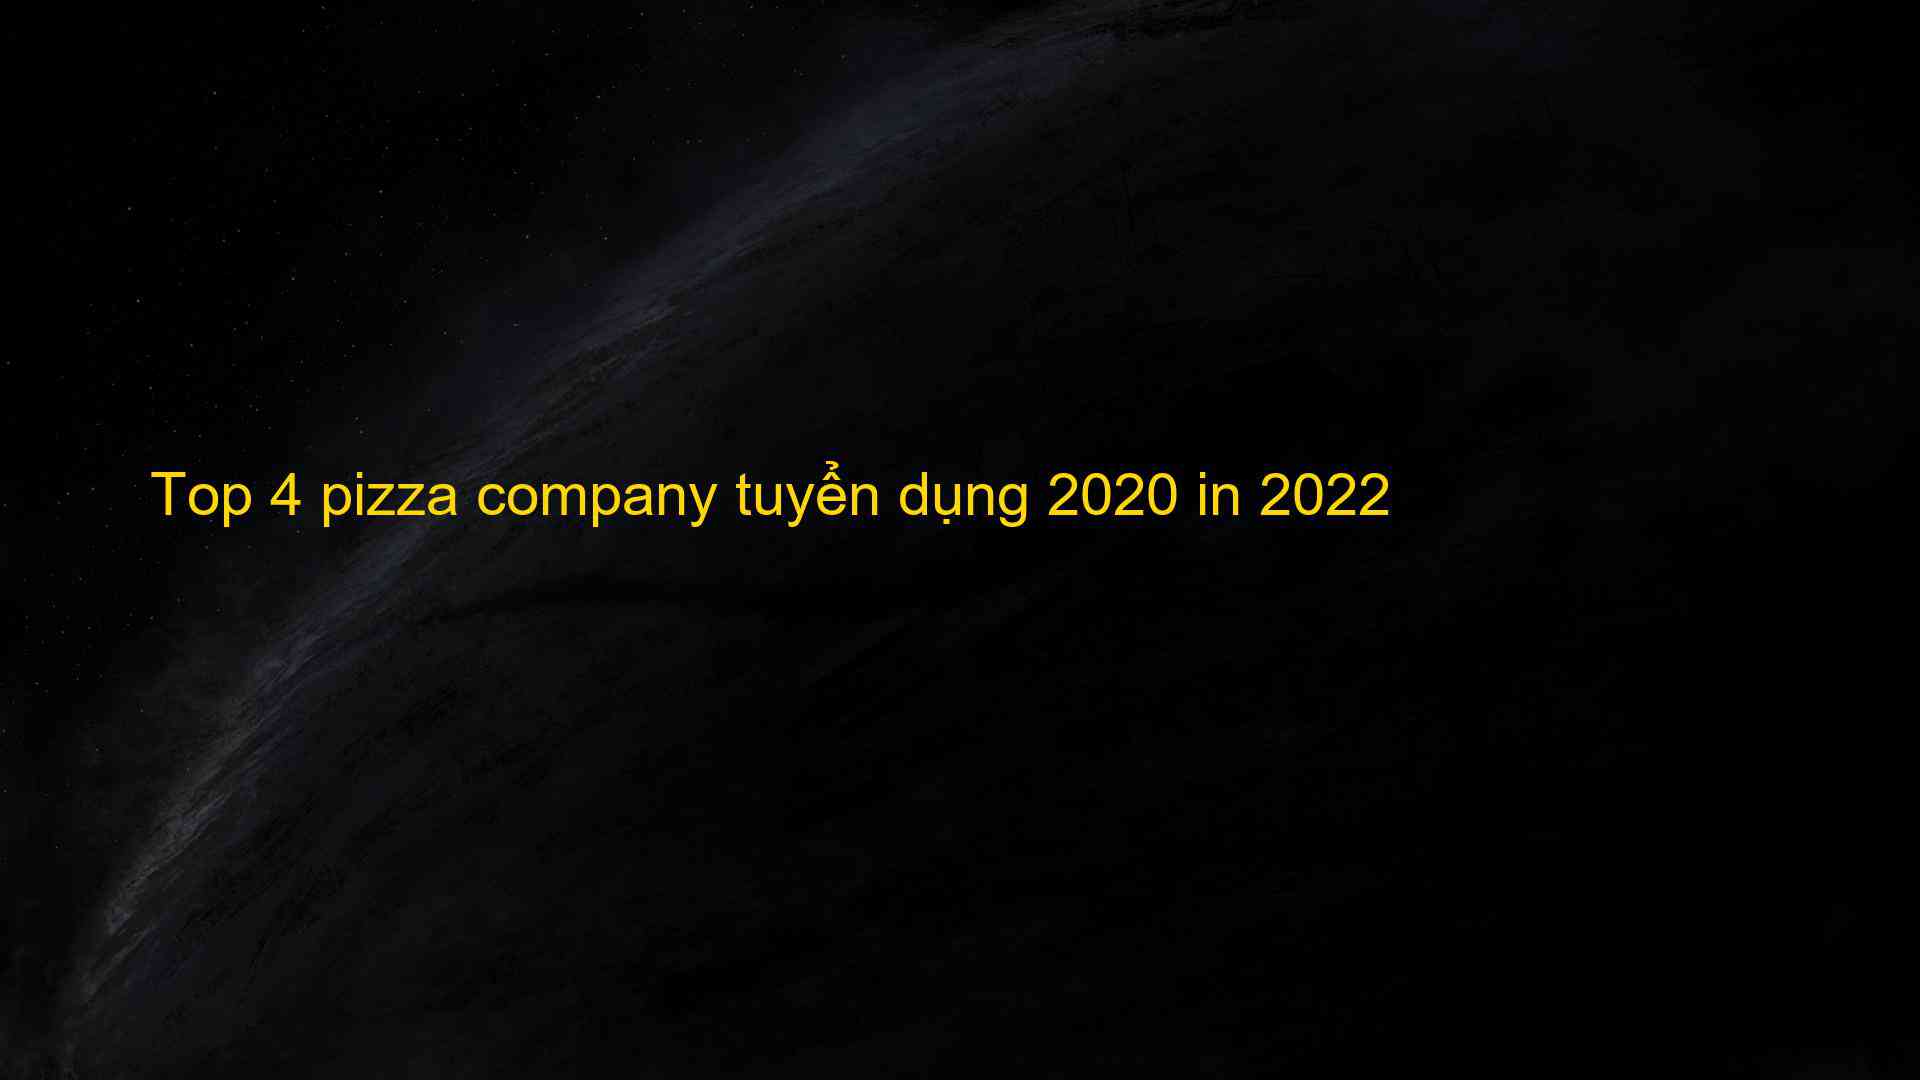 Top 4 pizza company tuyen dung 2020 in 2022 1660110894